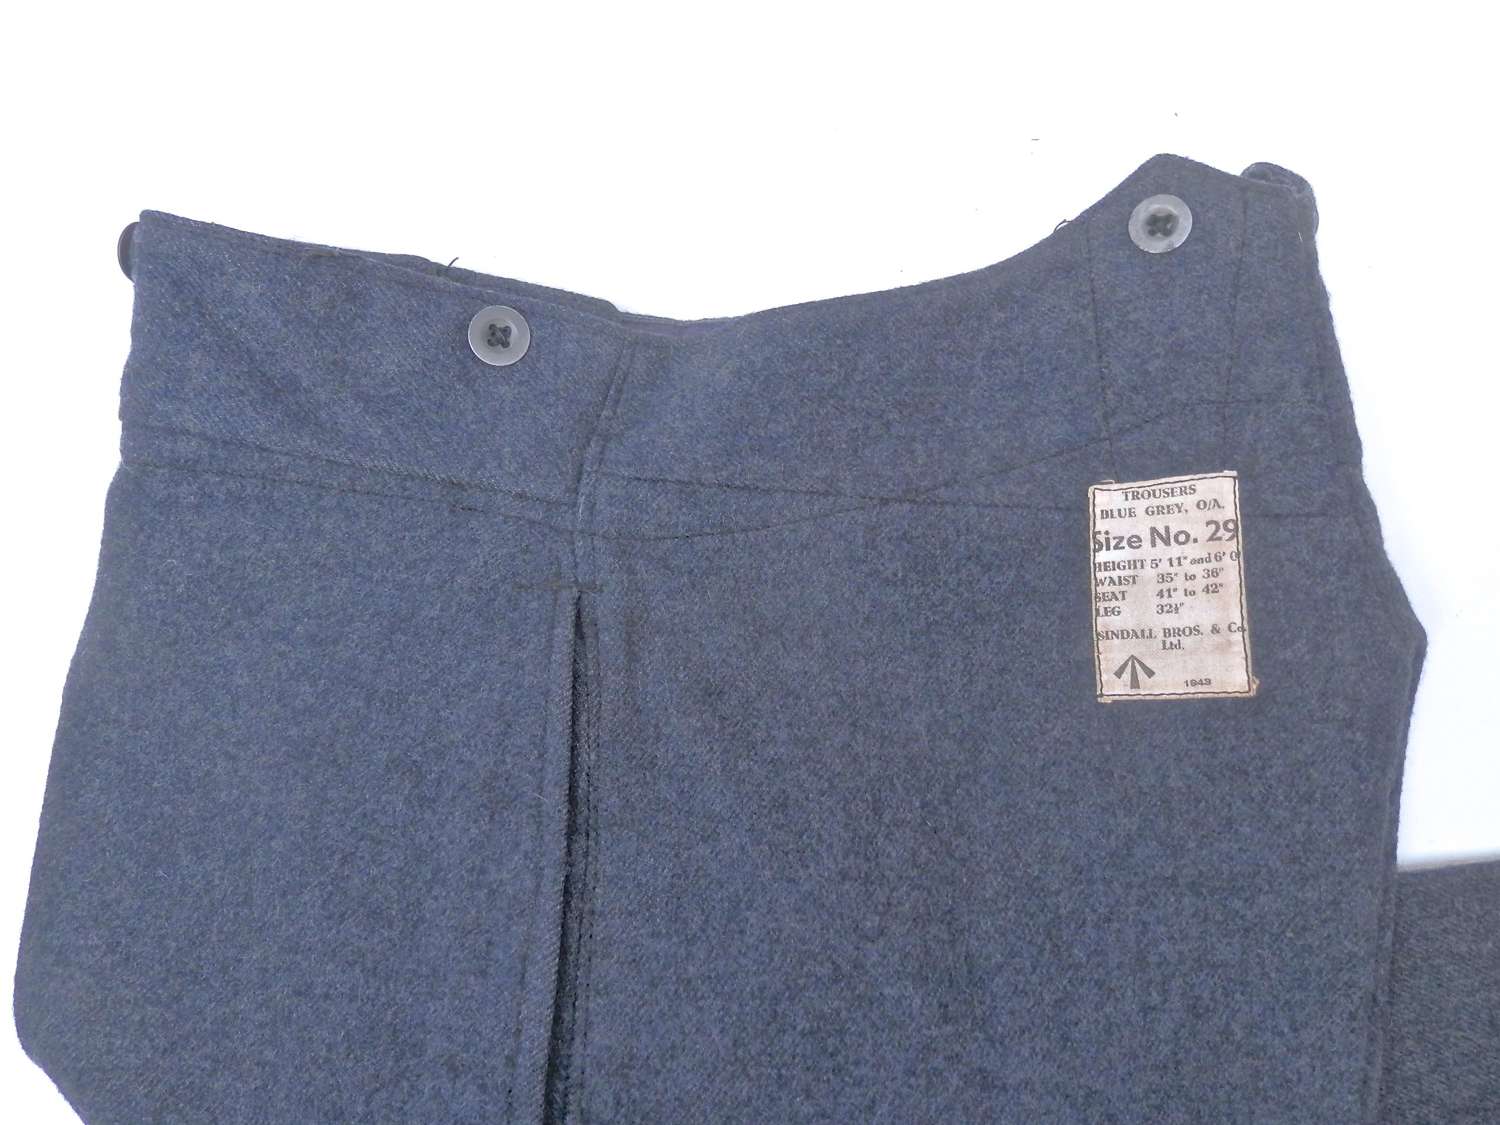 WW2 RAF other ranks trousers large size